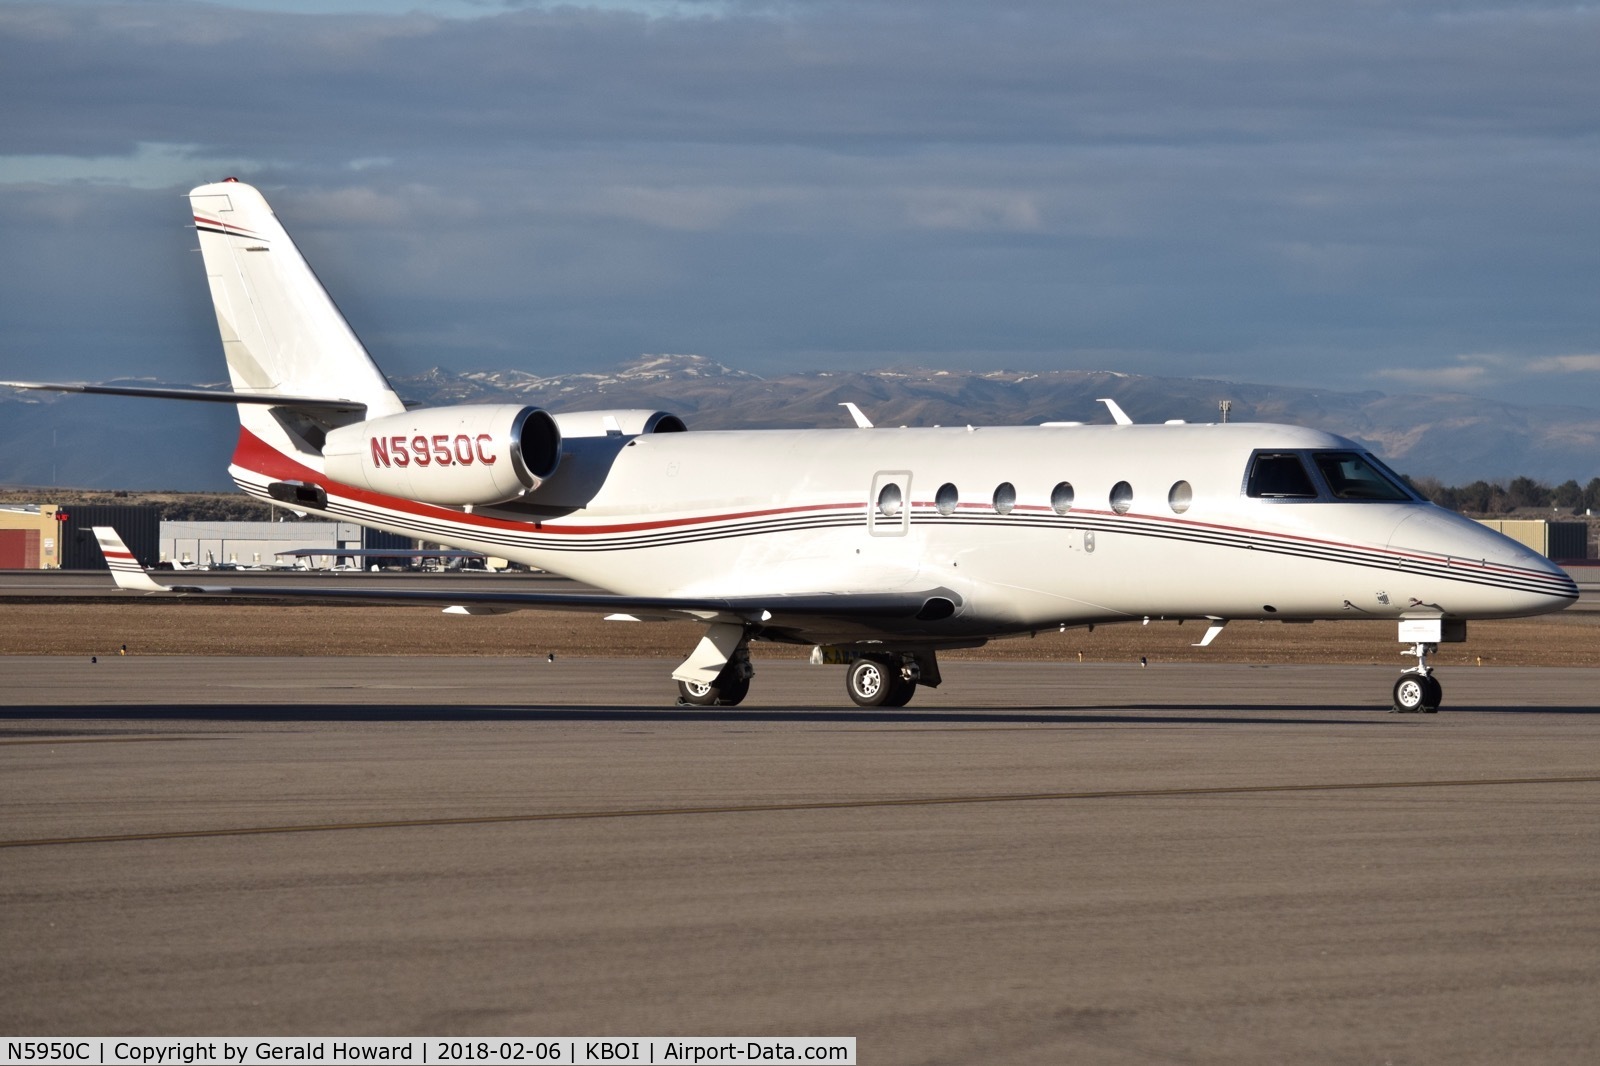 N5950C, 2006 Israel Aircraft Industries Gulfstream G150 C/N 213, Taxiing to the north GA ramp.